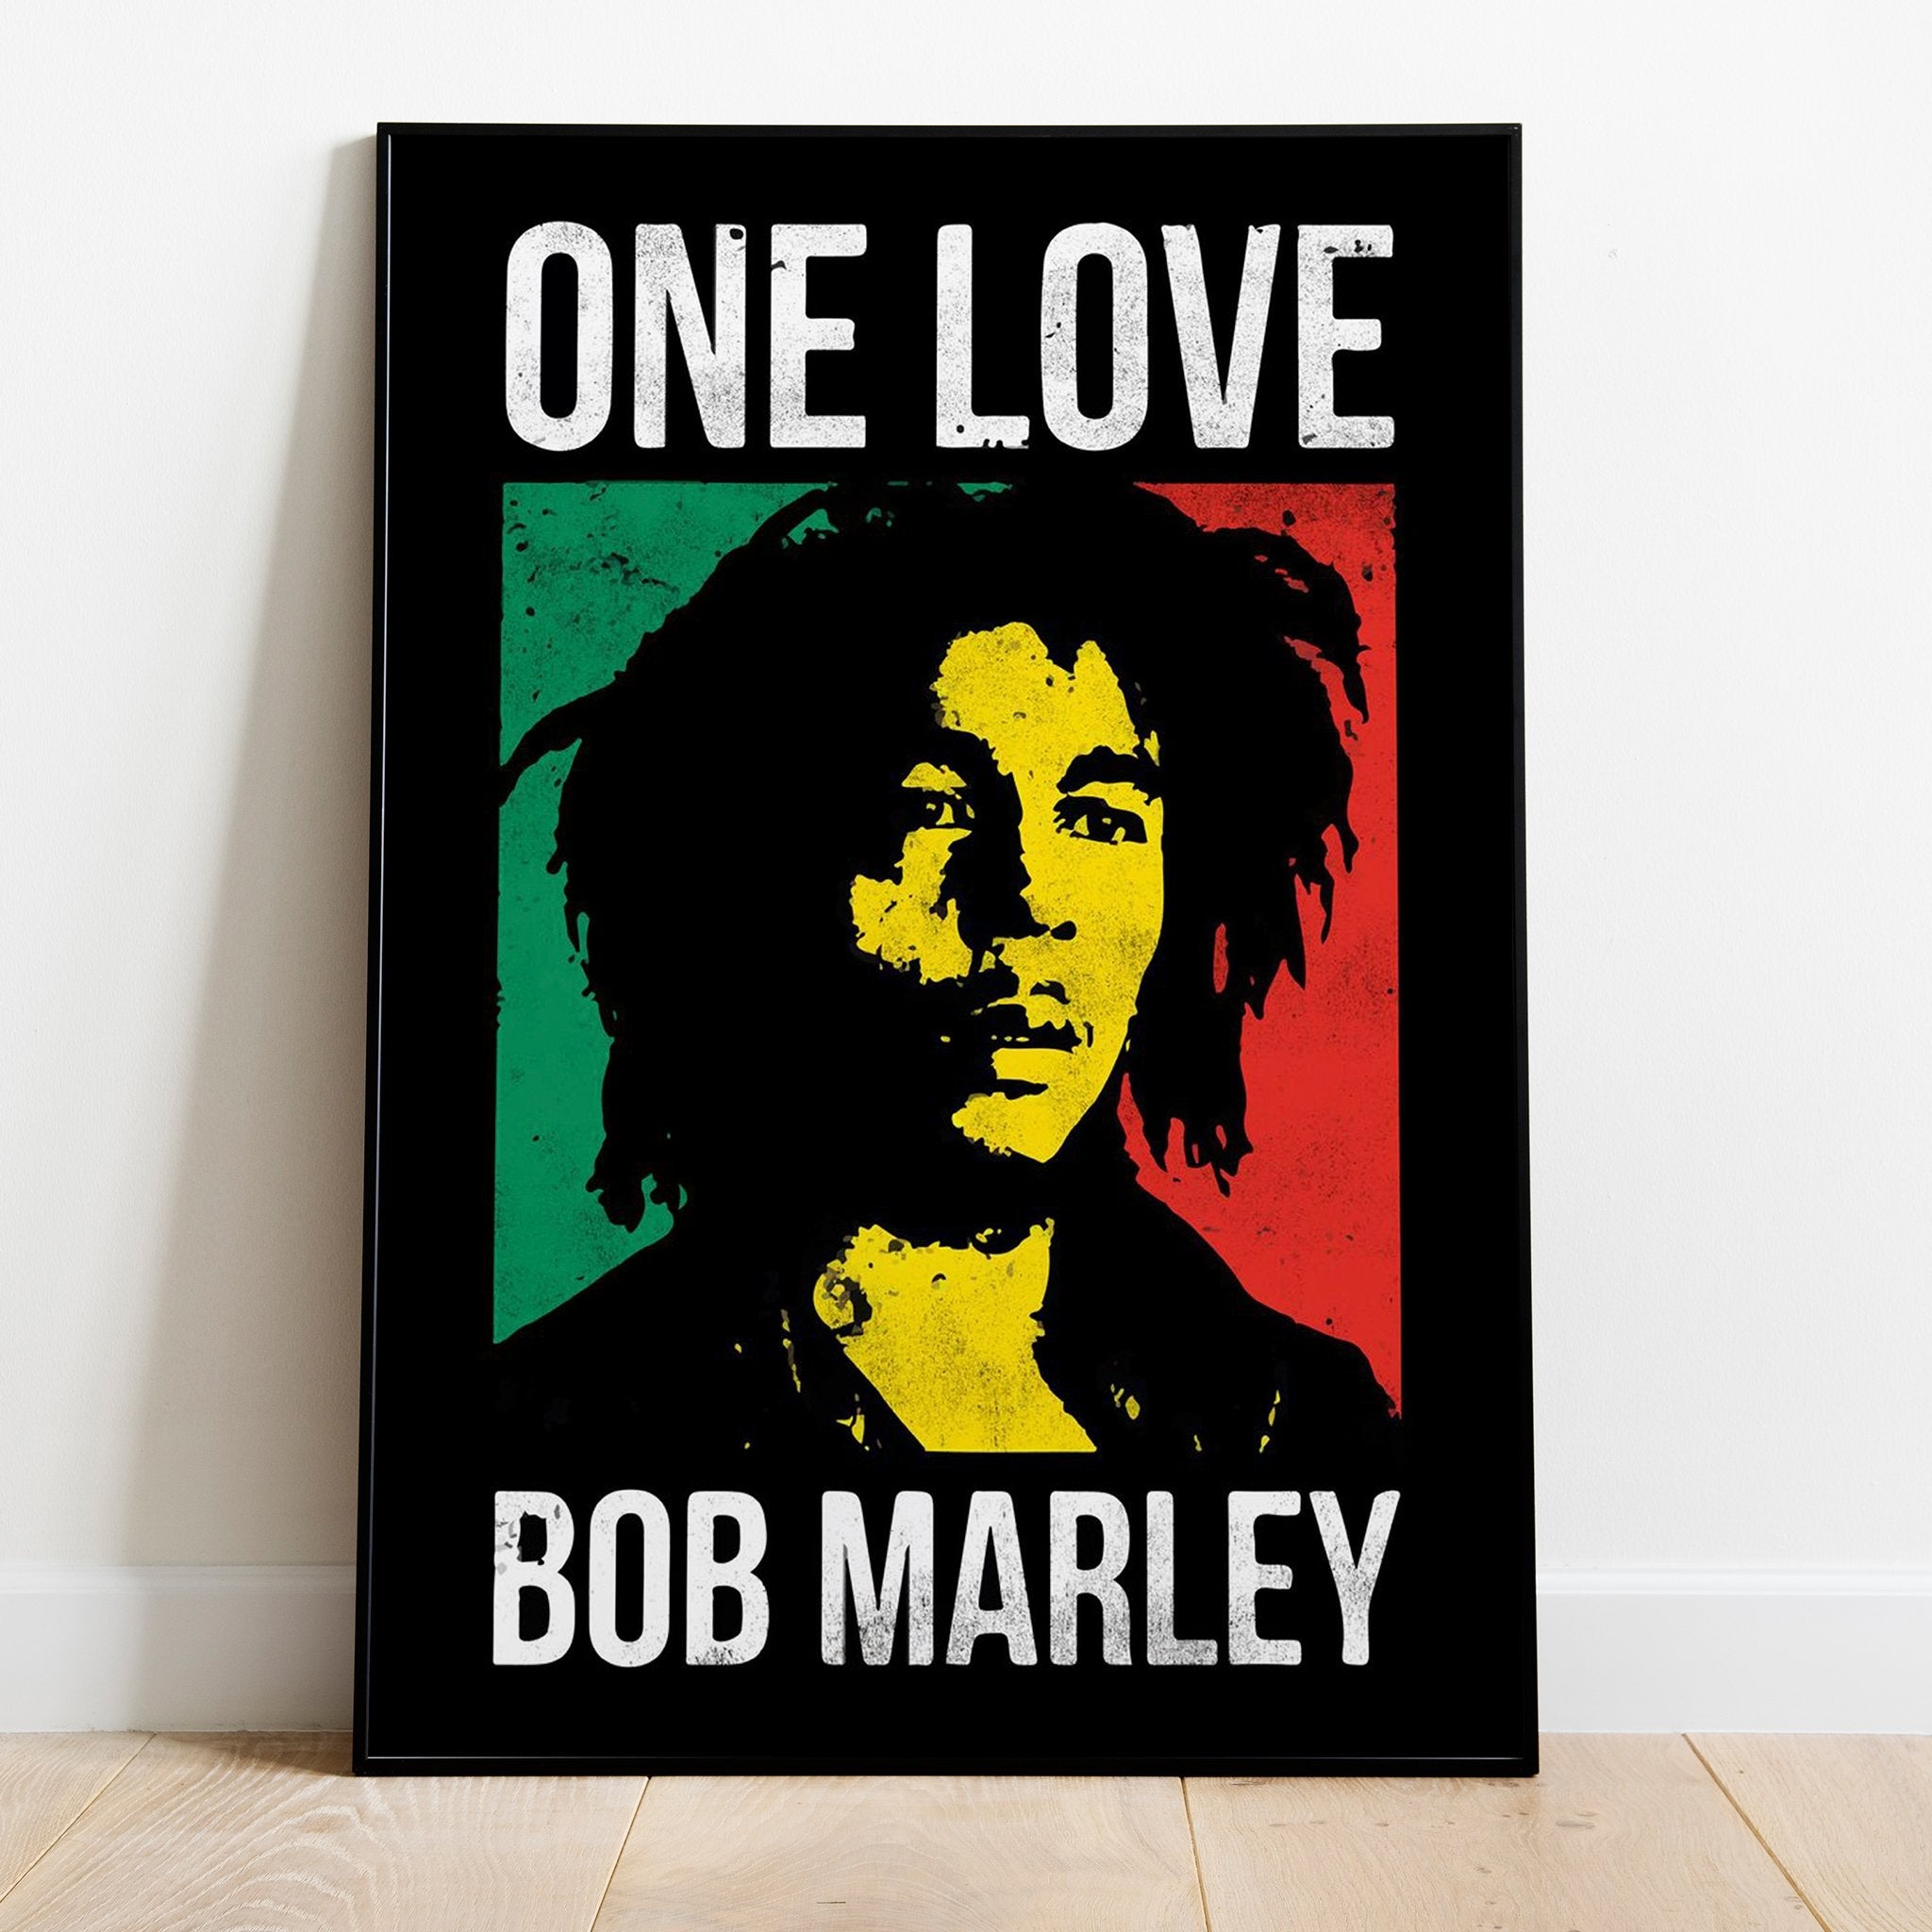 One Love - KME means the very best